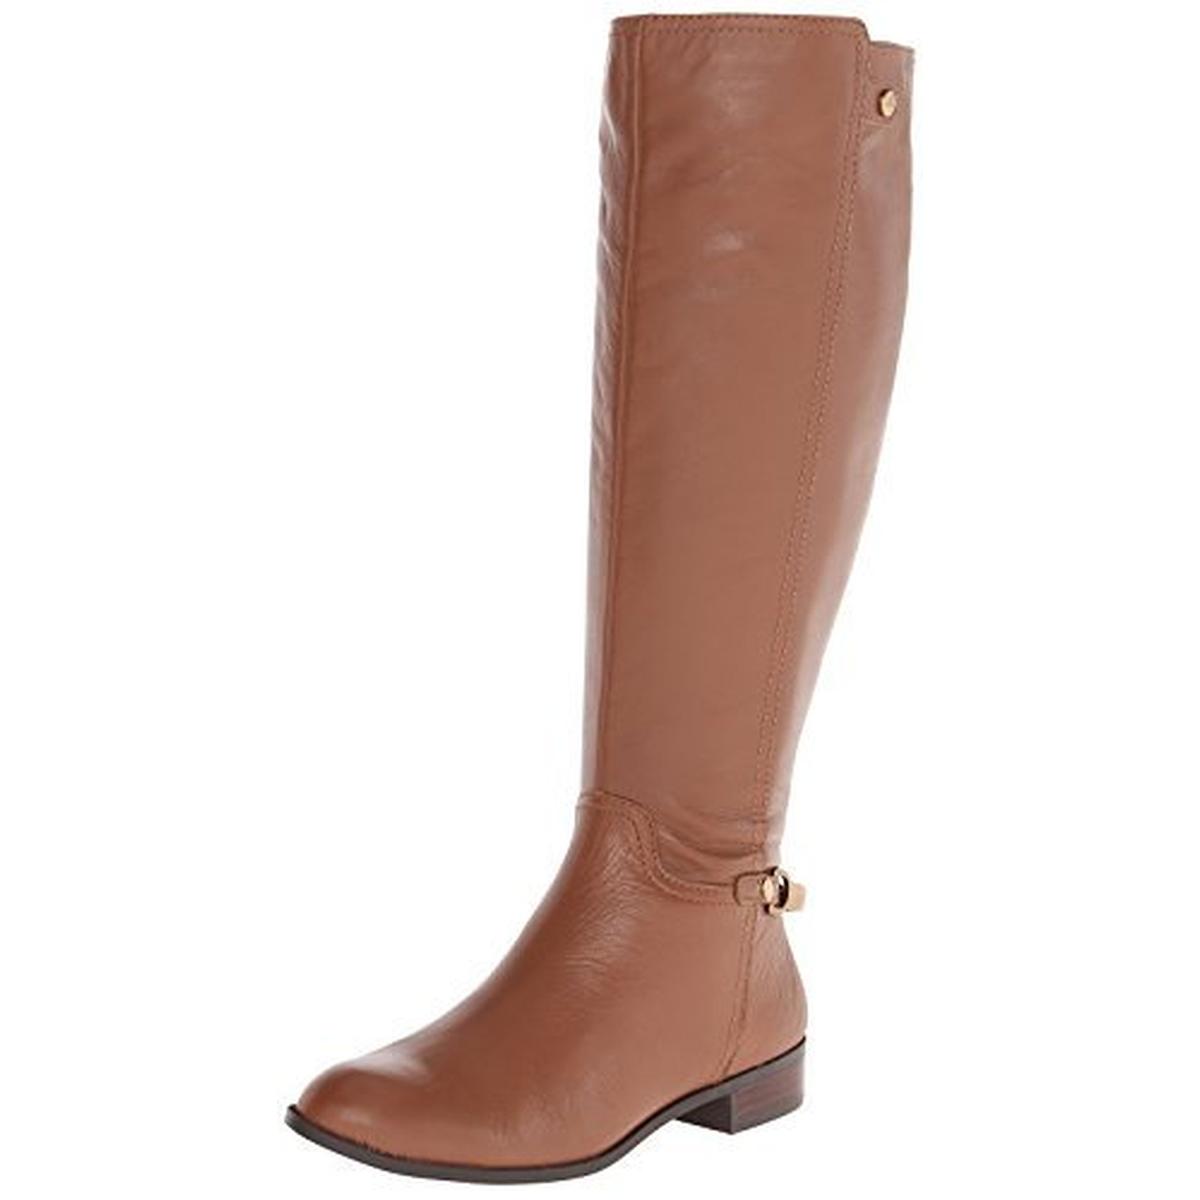 Anne Klein 7563 Womens Kacey Leather Knee-High Riding Boots Shoes BHFO ...